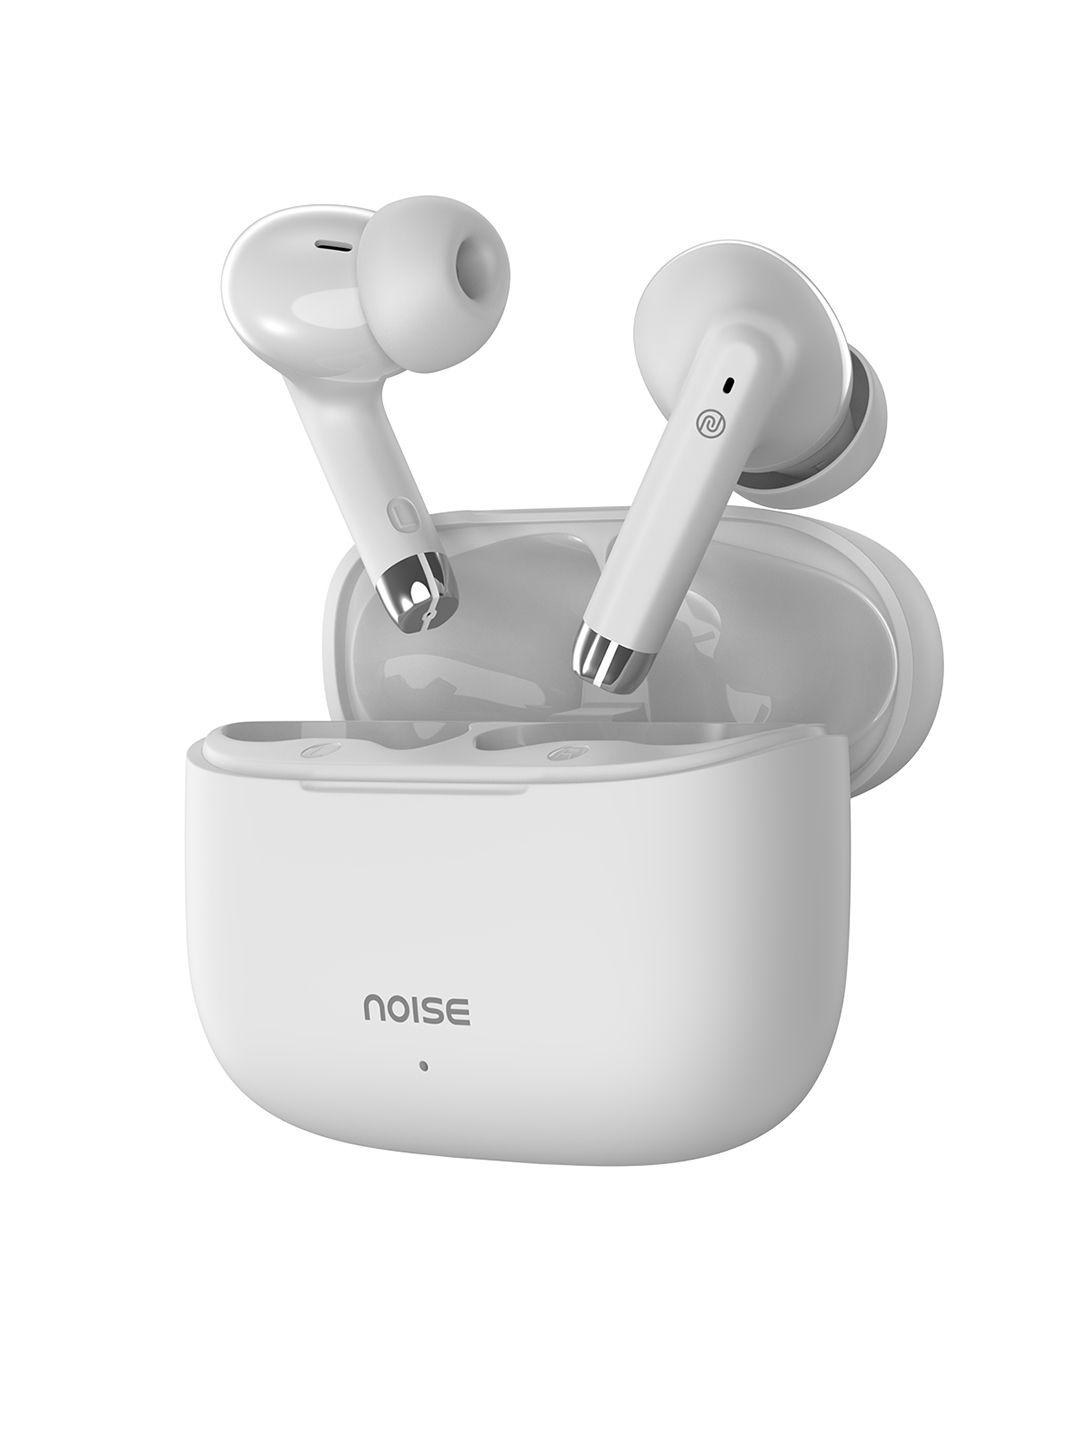 noise-buds-aero-truly-wireless-earbuds-with-45hrs-playtime-and-13mm-driver